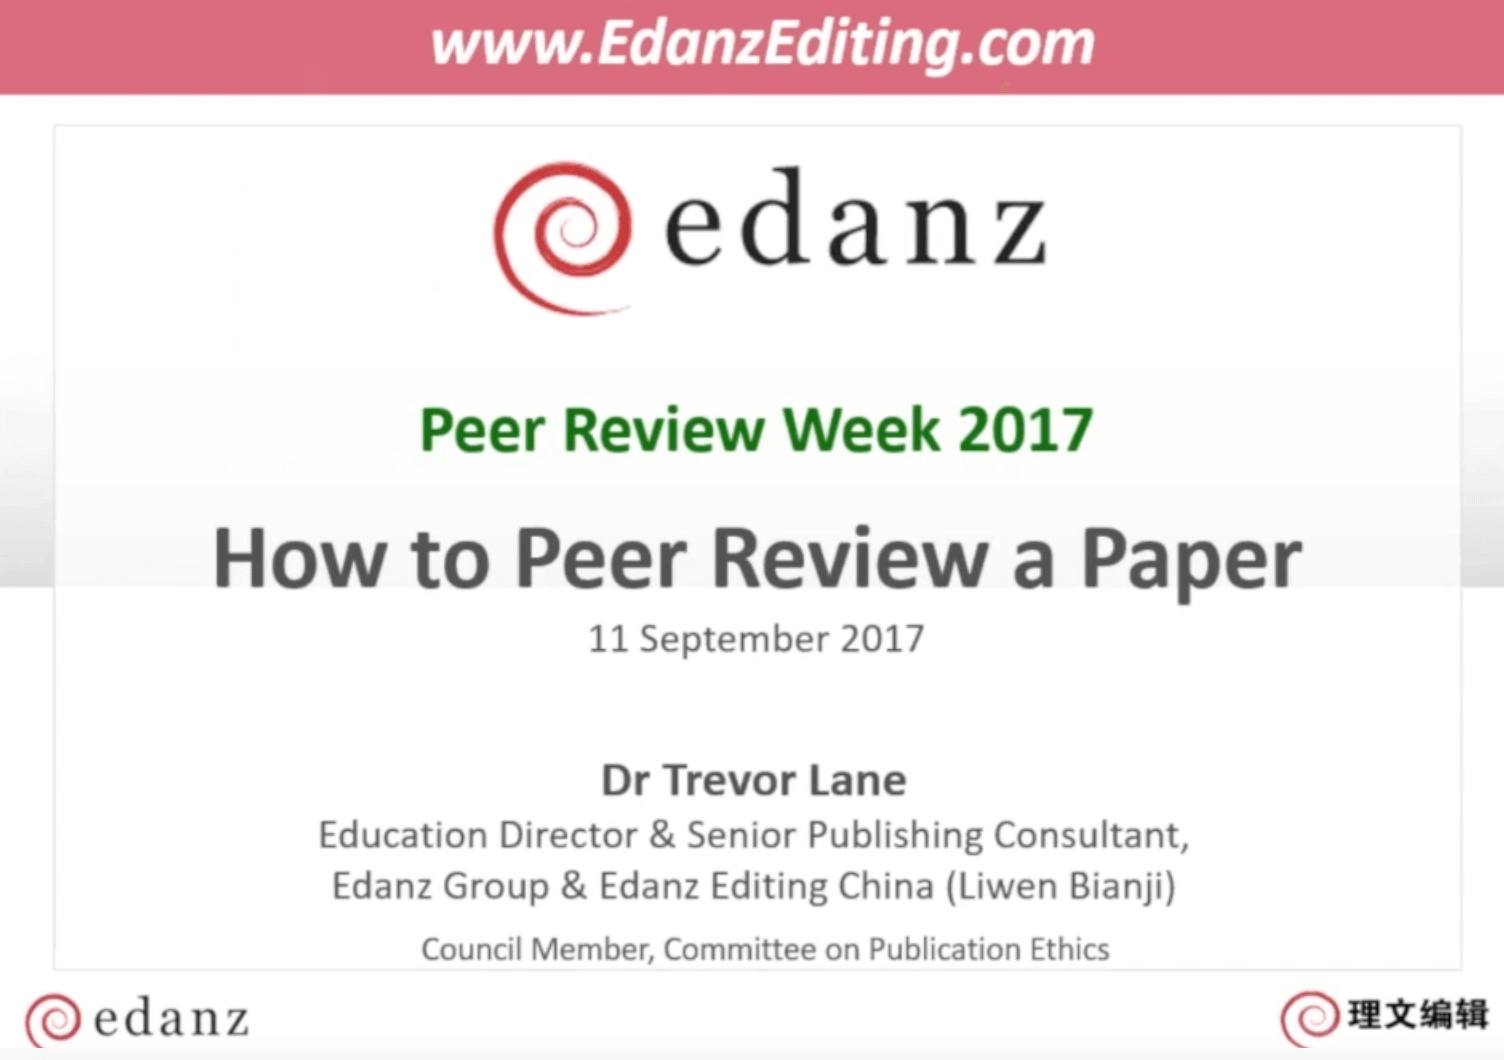 How to peer review a paper